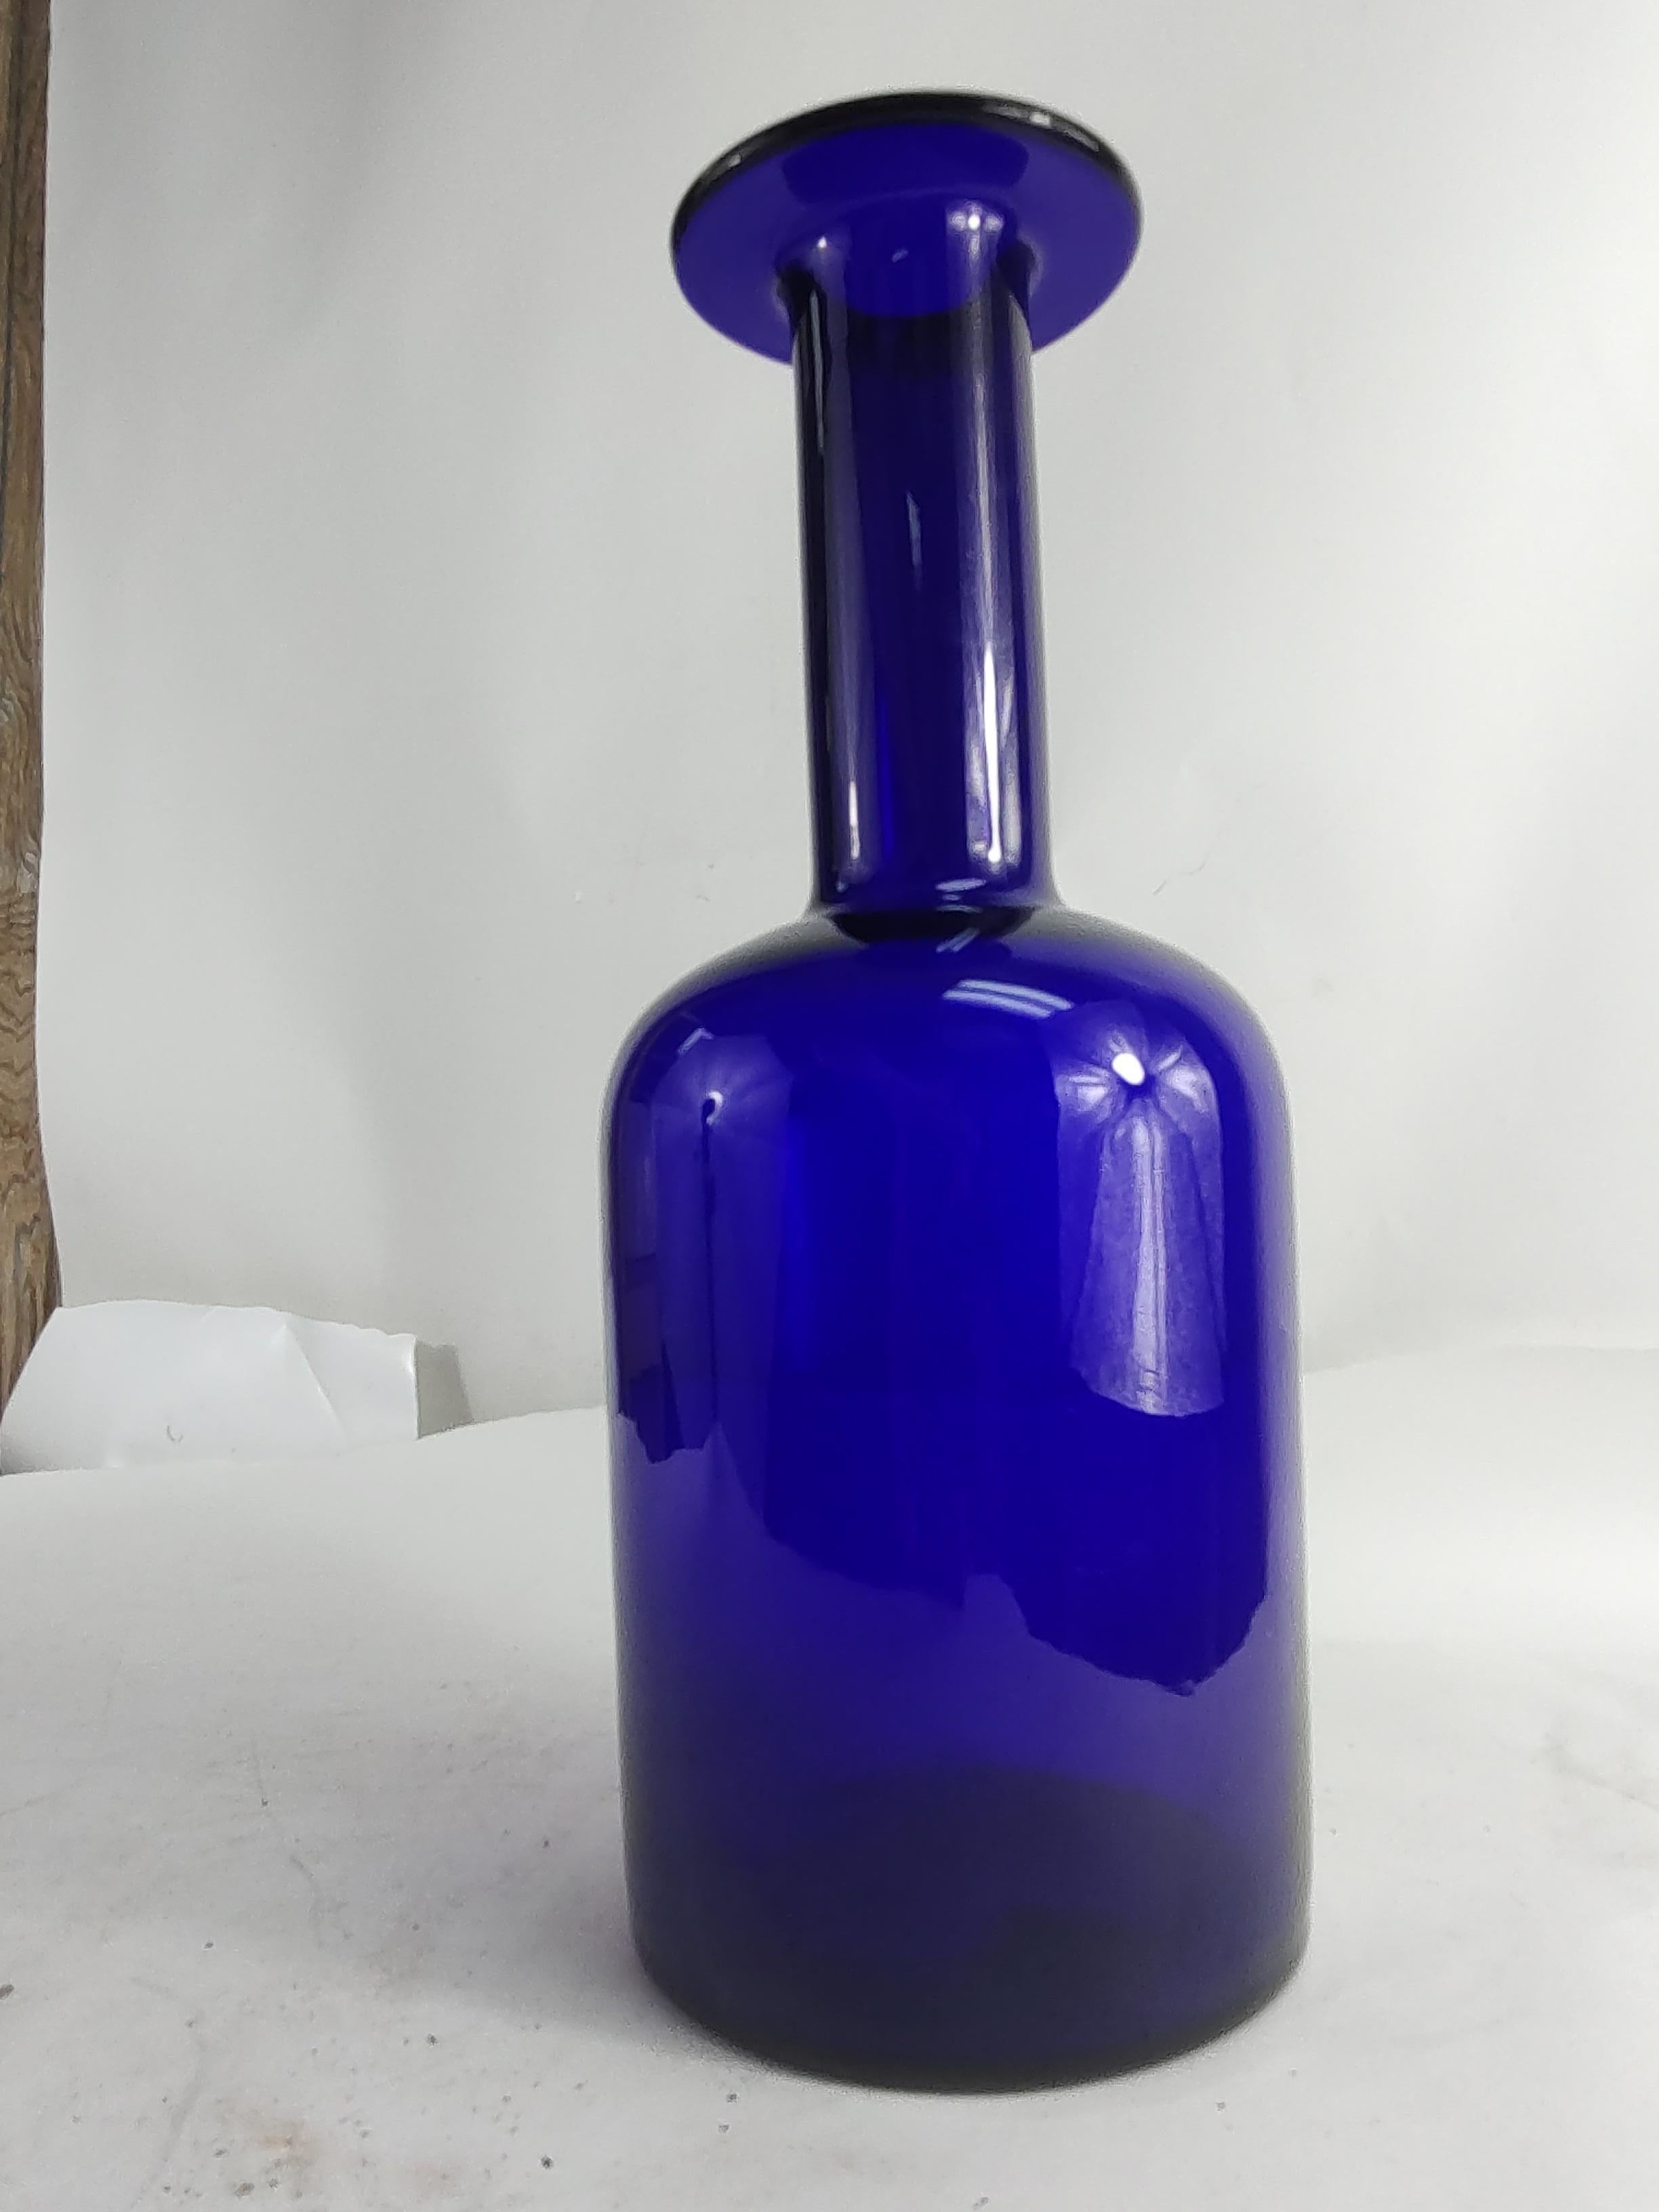 Fabulous deep & rich blue Art Glass vase by Otto Brauer for Holmgaard C1960. Striking color and tall 15